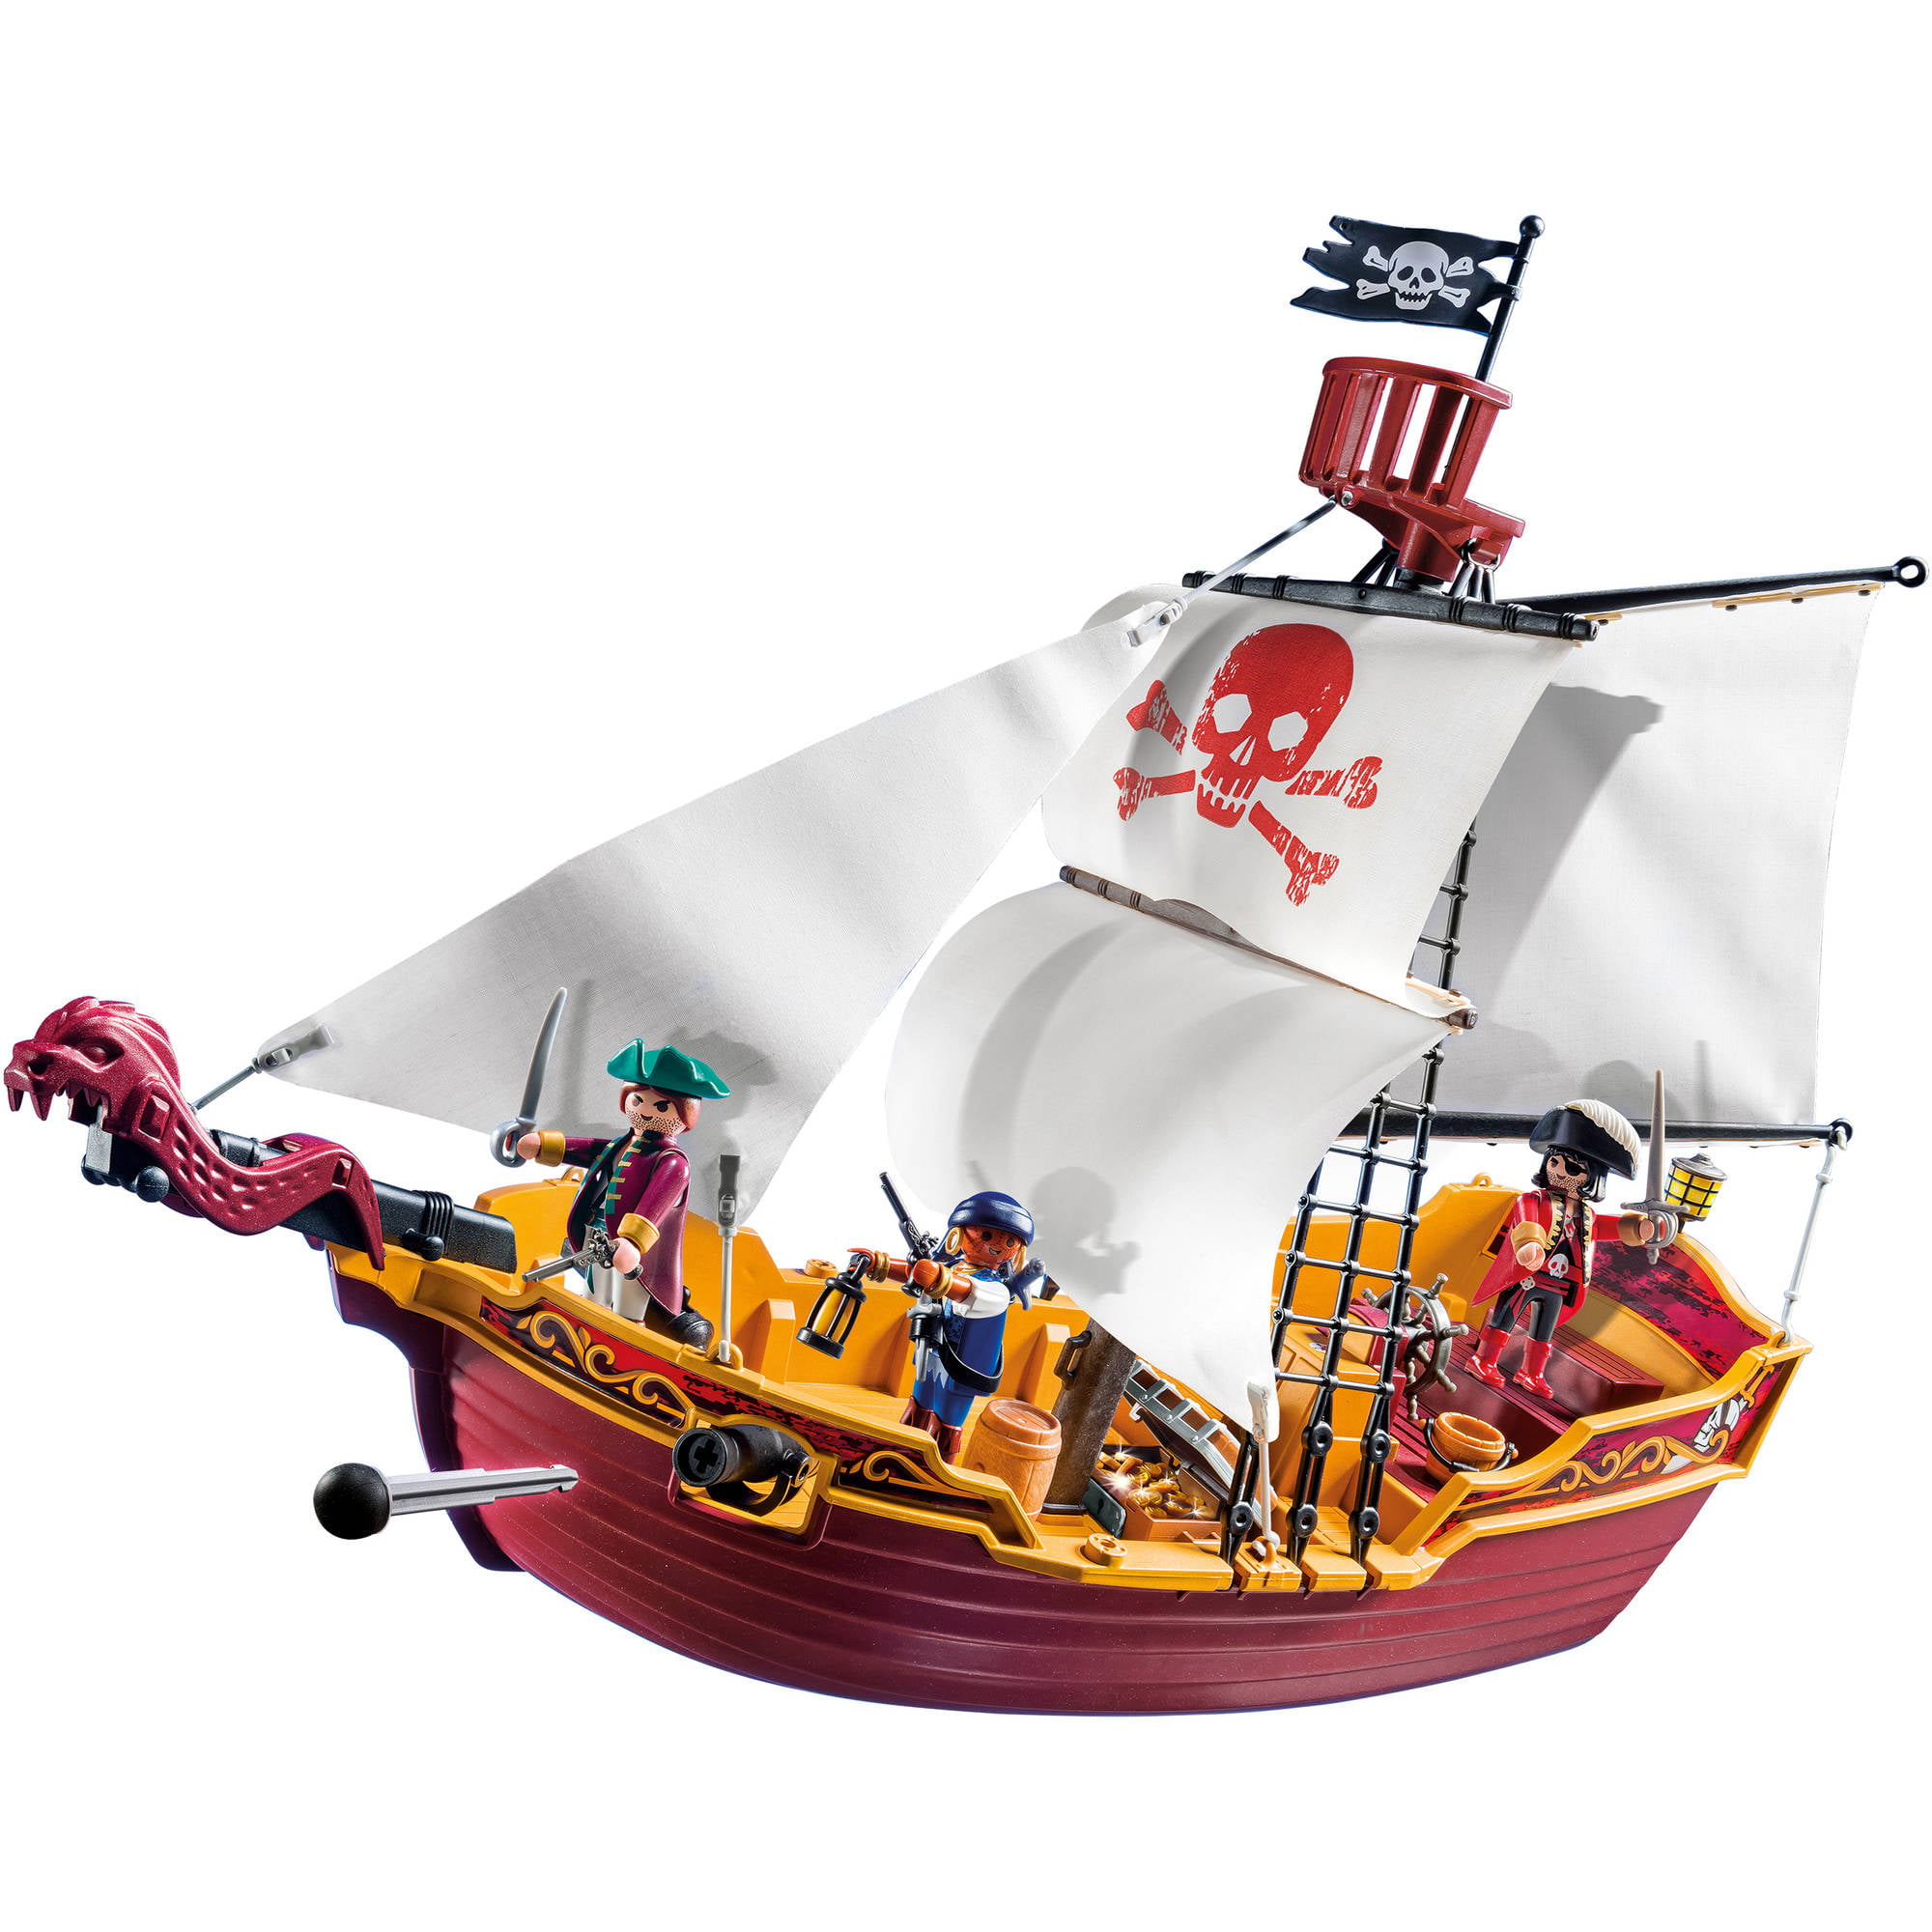 PLAYMOBIL 5678 Red Serpent Pirate Ship Playset Model 74pcs for sale online 